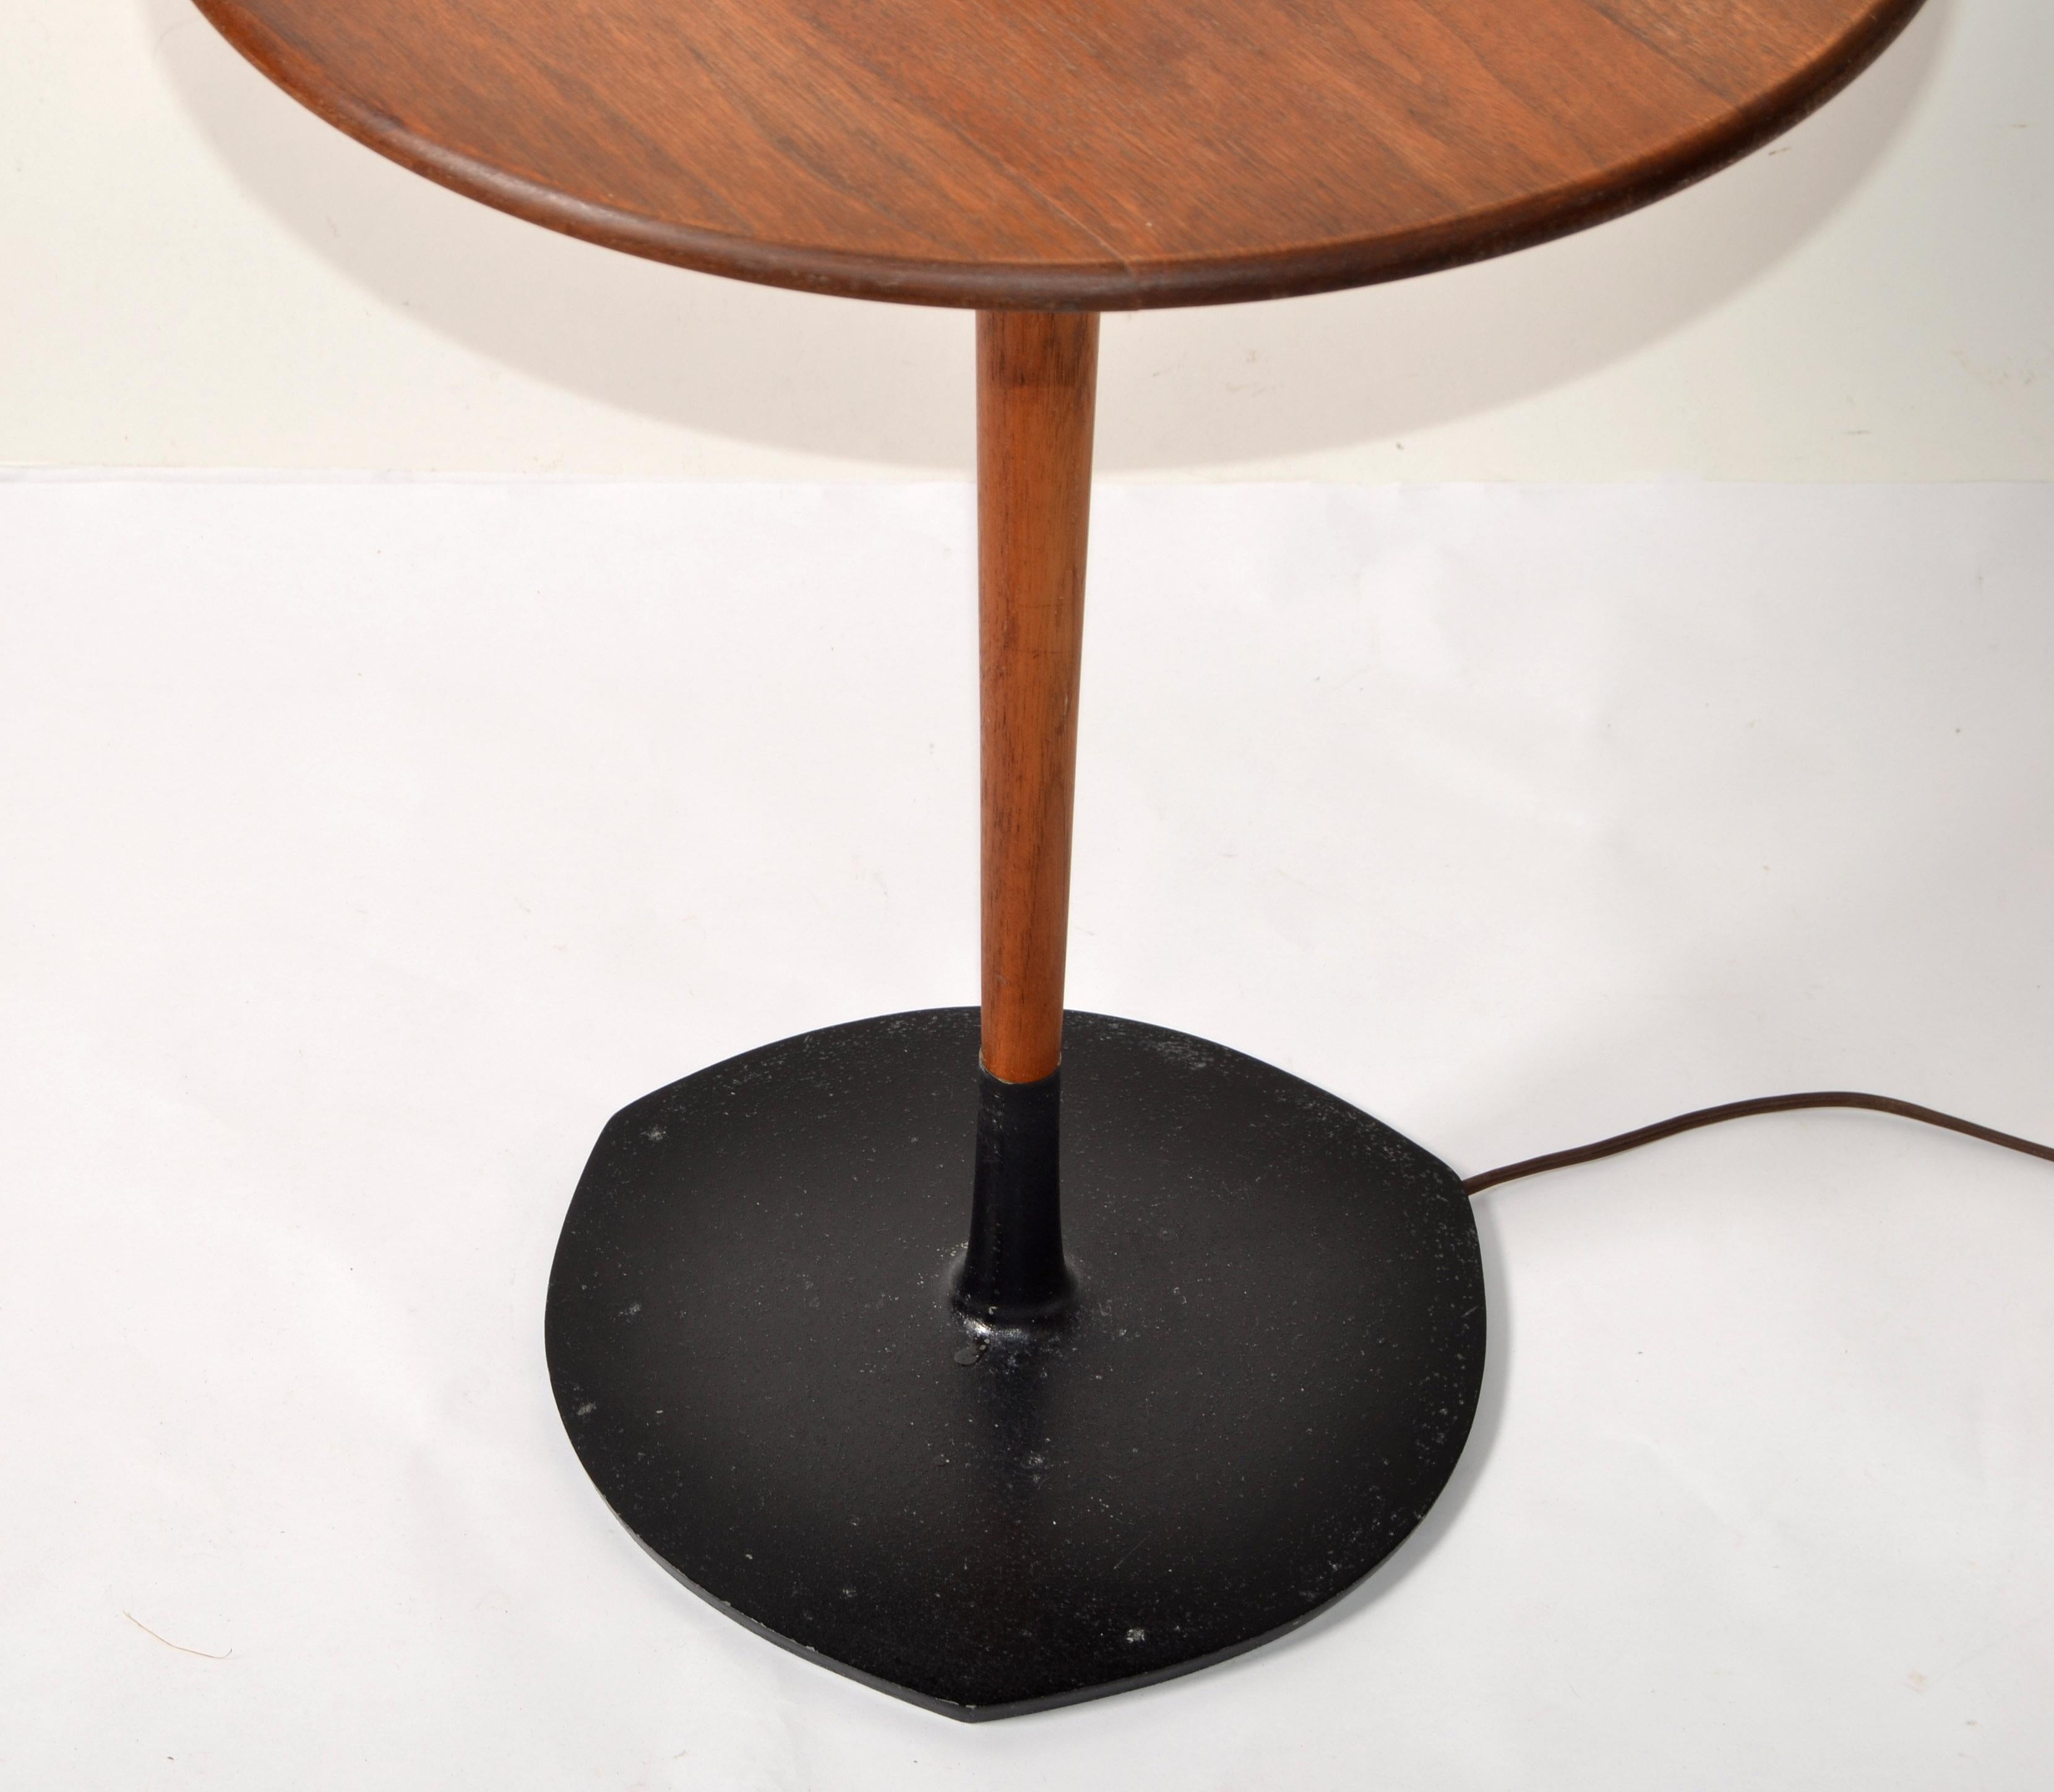 Brass Laurel Tapered Walnut Round Table Floor Lamp Shade Mid-Century Modern American For Sale